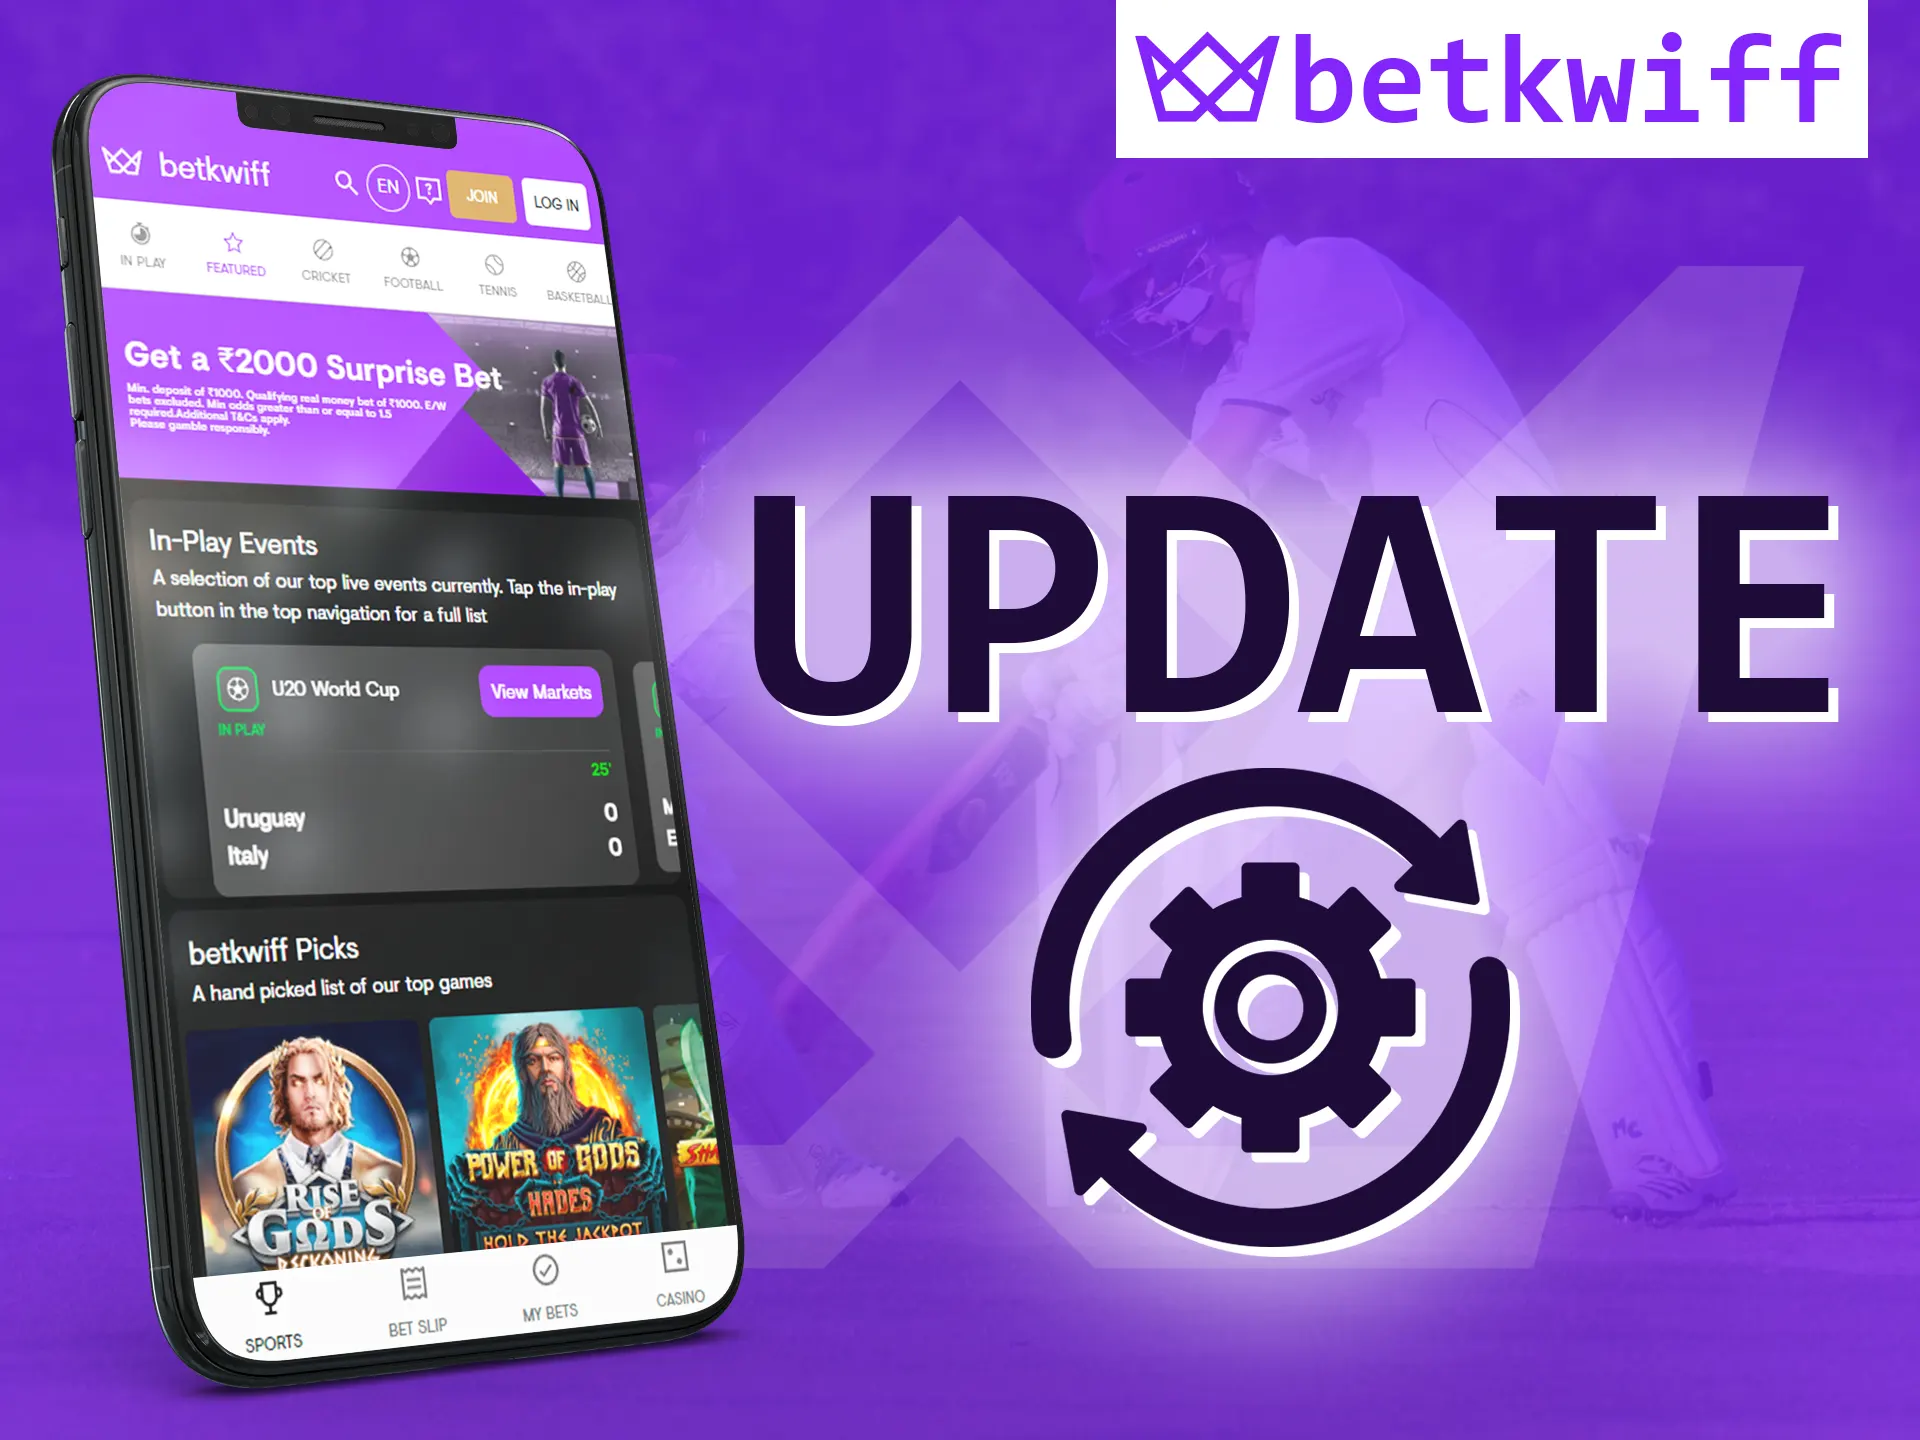 Be sure to update the Betkwiff app to the latest version.